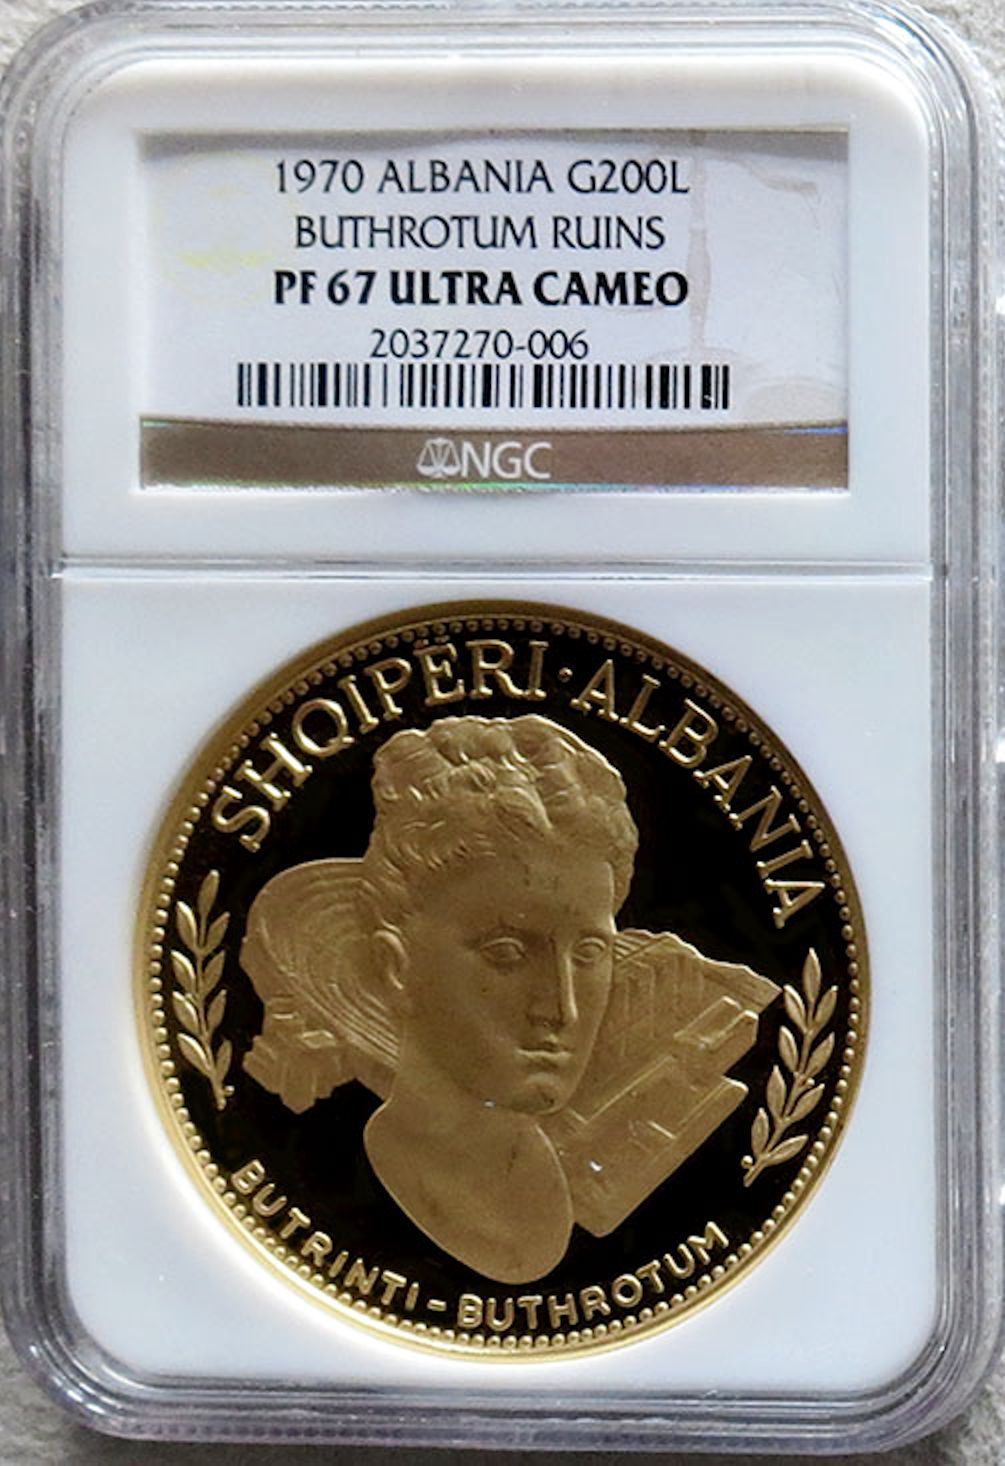 1970 GOLD ALBANIA 200 LEKE NGC PROOF 67 ULTRA CAMEO "ANCIENT BUTHROTUM RUINS" ONLY 100 MINTED